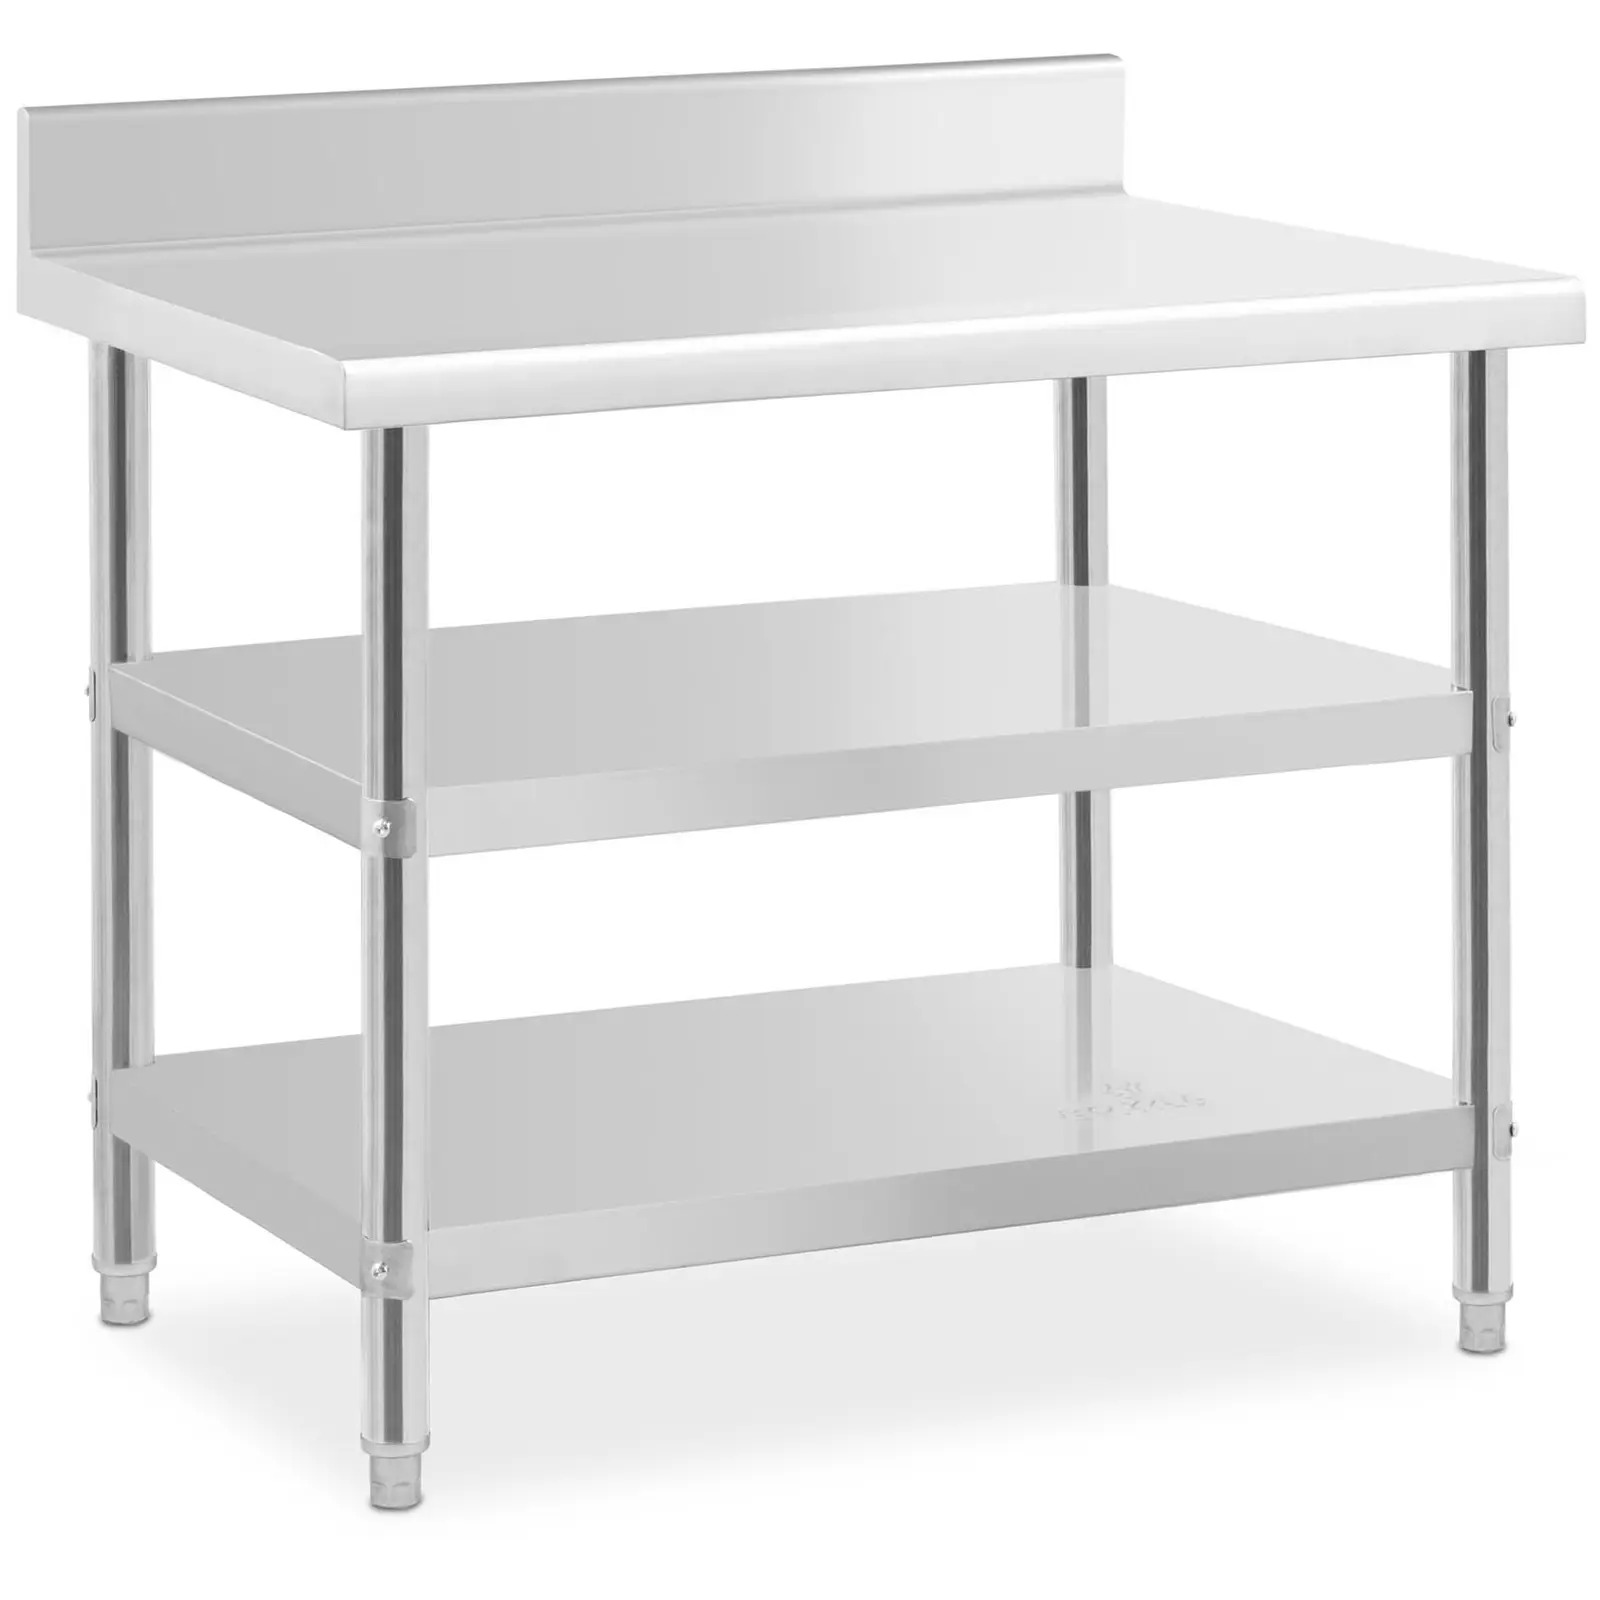 Stainless Steel Work Table with upstand - 100 x 70 x 16.5 cm - 204 kg - 2 shelves - Royal Catering